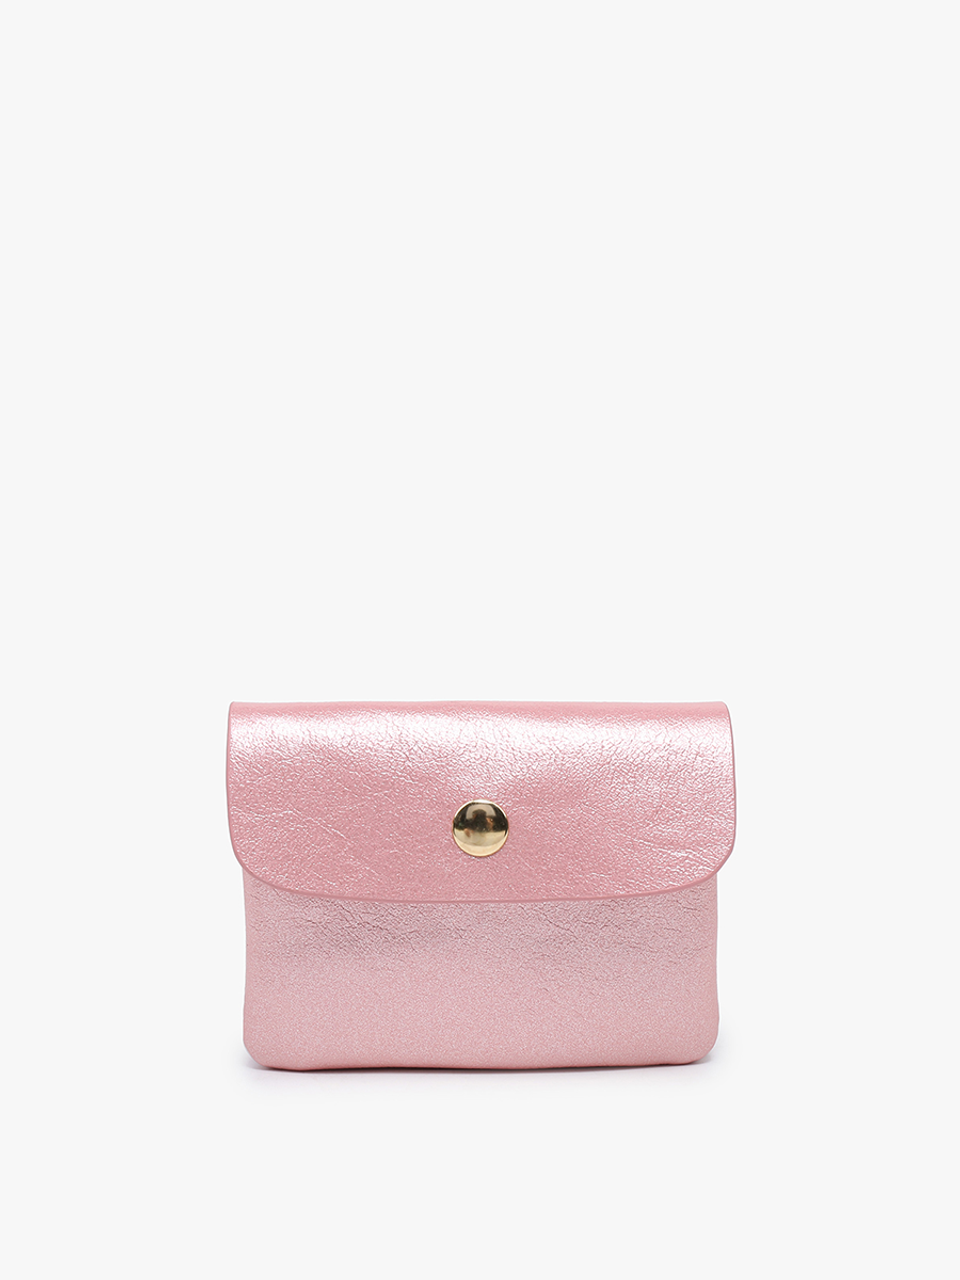 Ethel Pink Small Clutch/Wallet